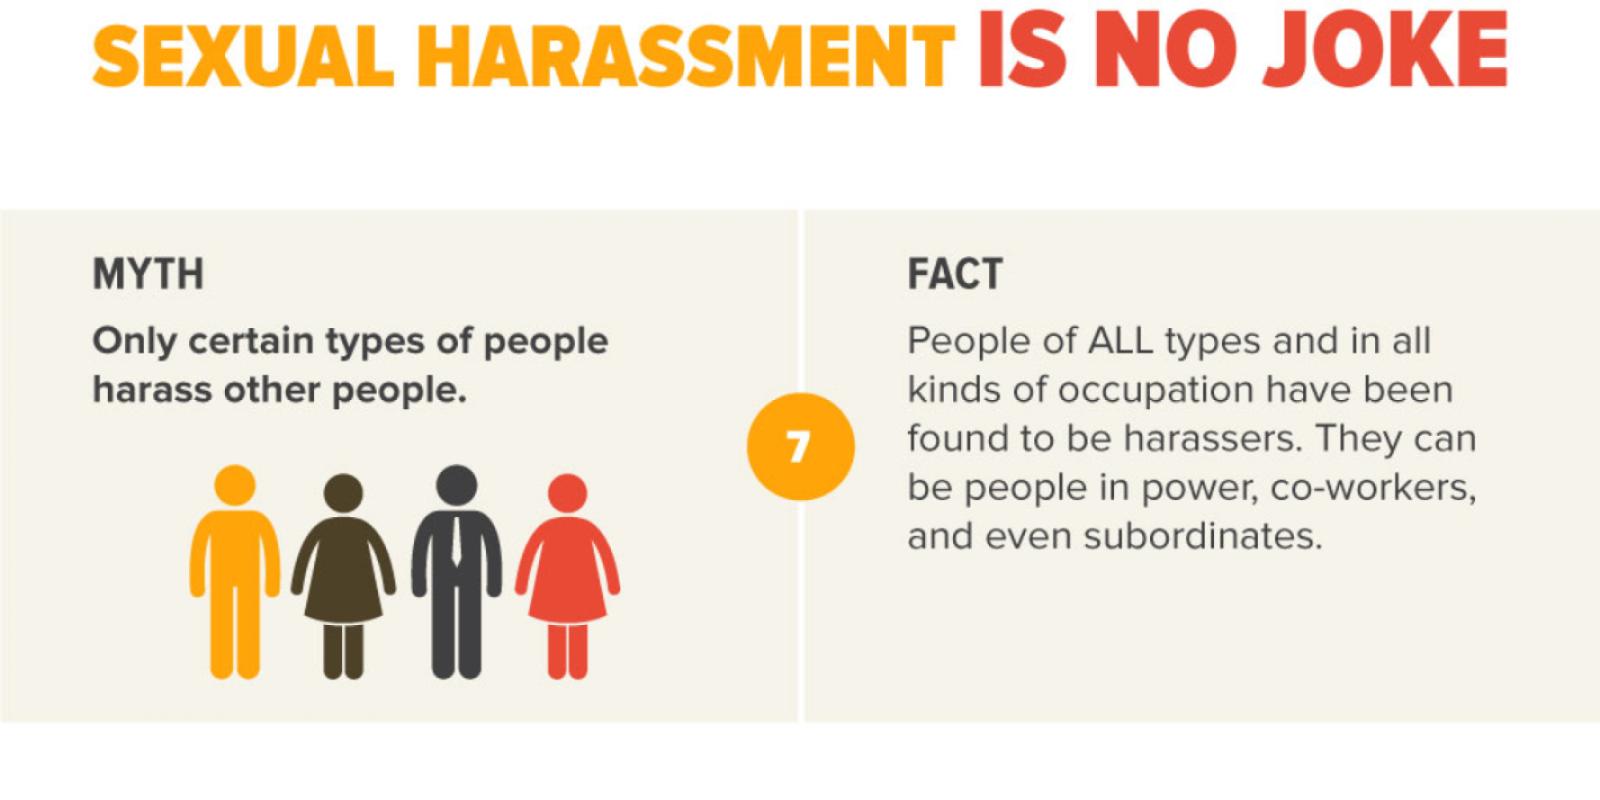 MYTH: only certain types of people harass other people. FACT: People of ALL types and in all kinds of occupation have been found to be harassers.